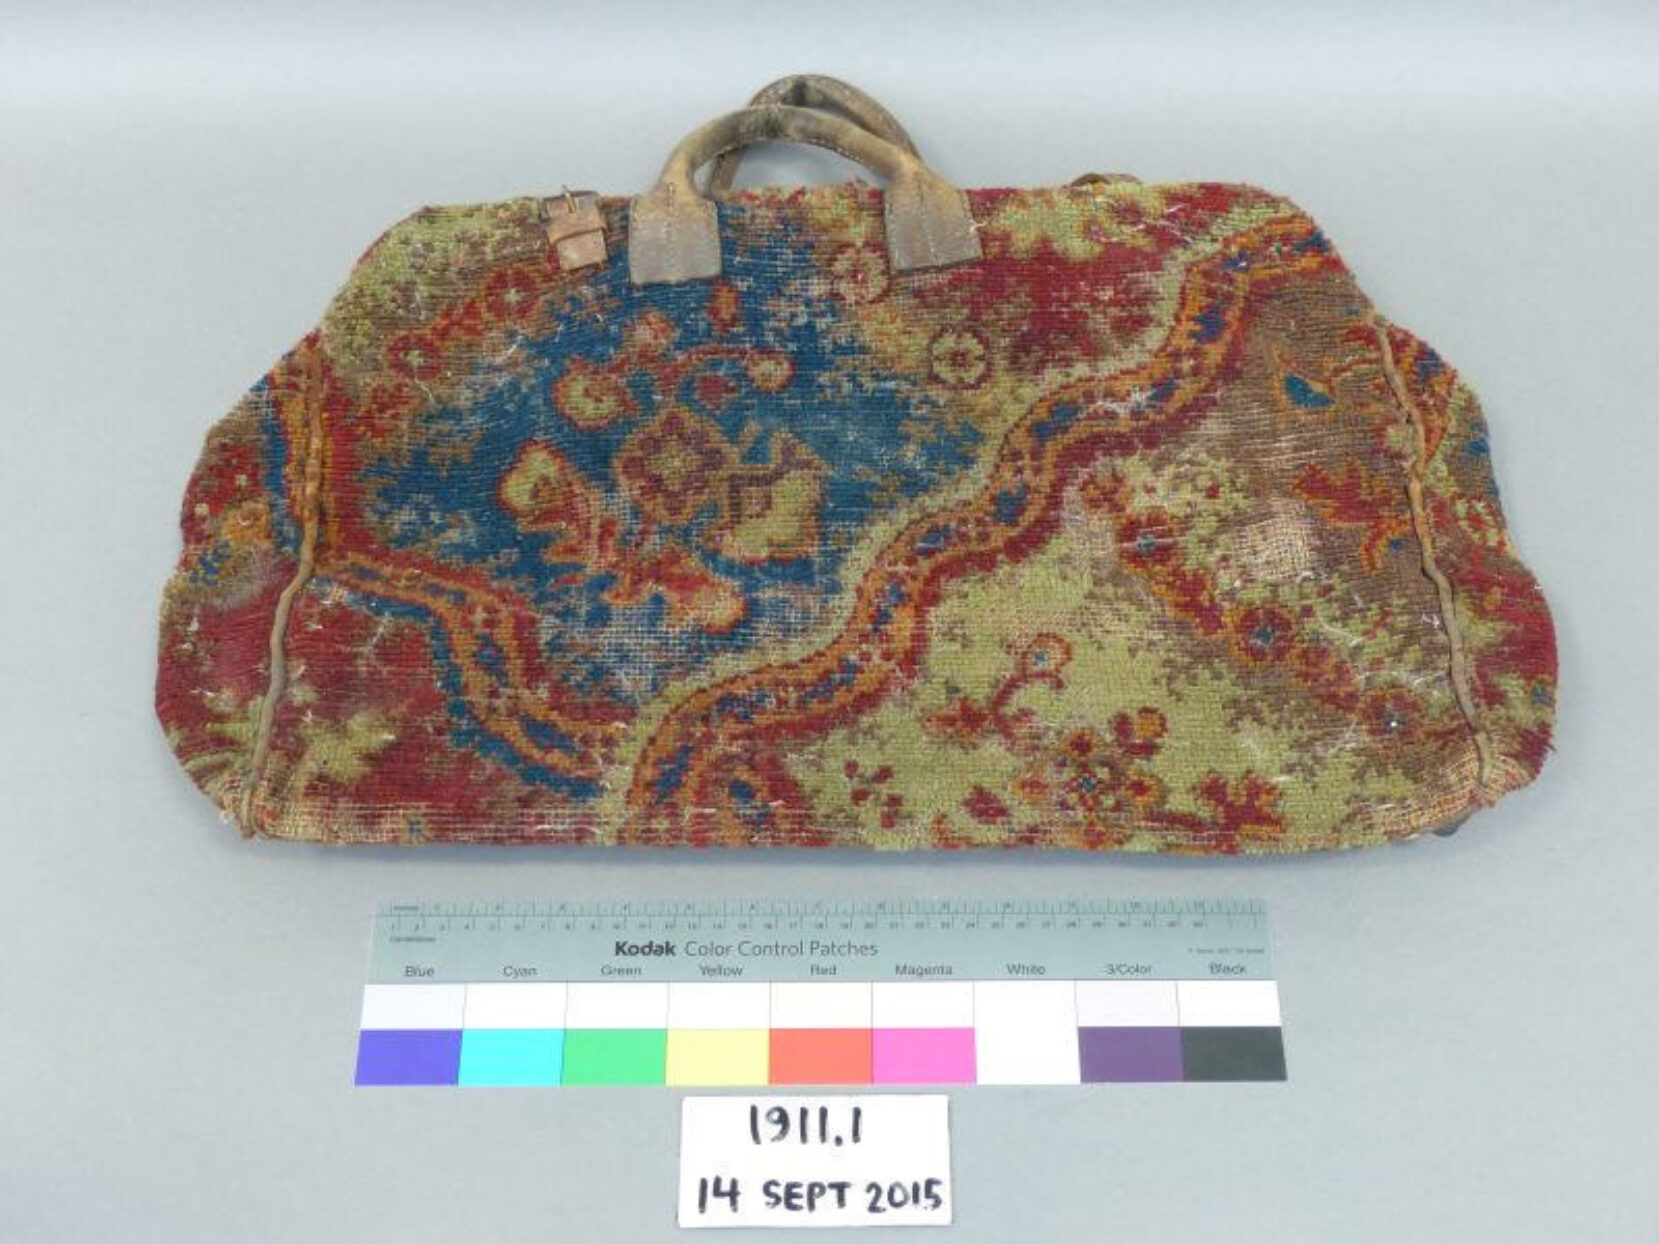 Object 1911 1 Bag made of multi coloured carpet like material with leather handles and straps